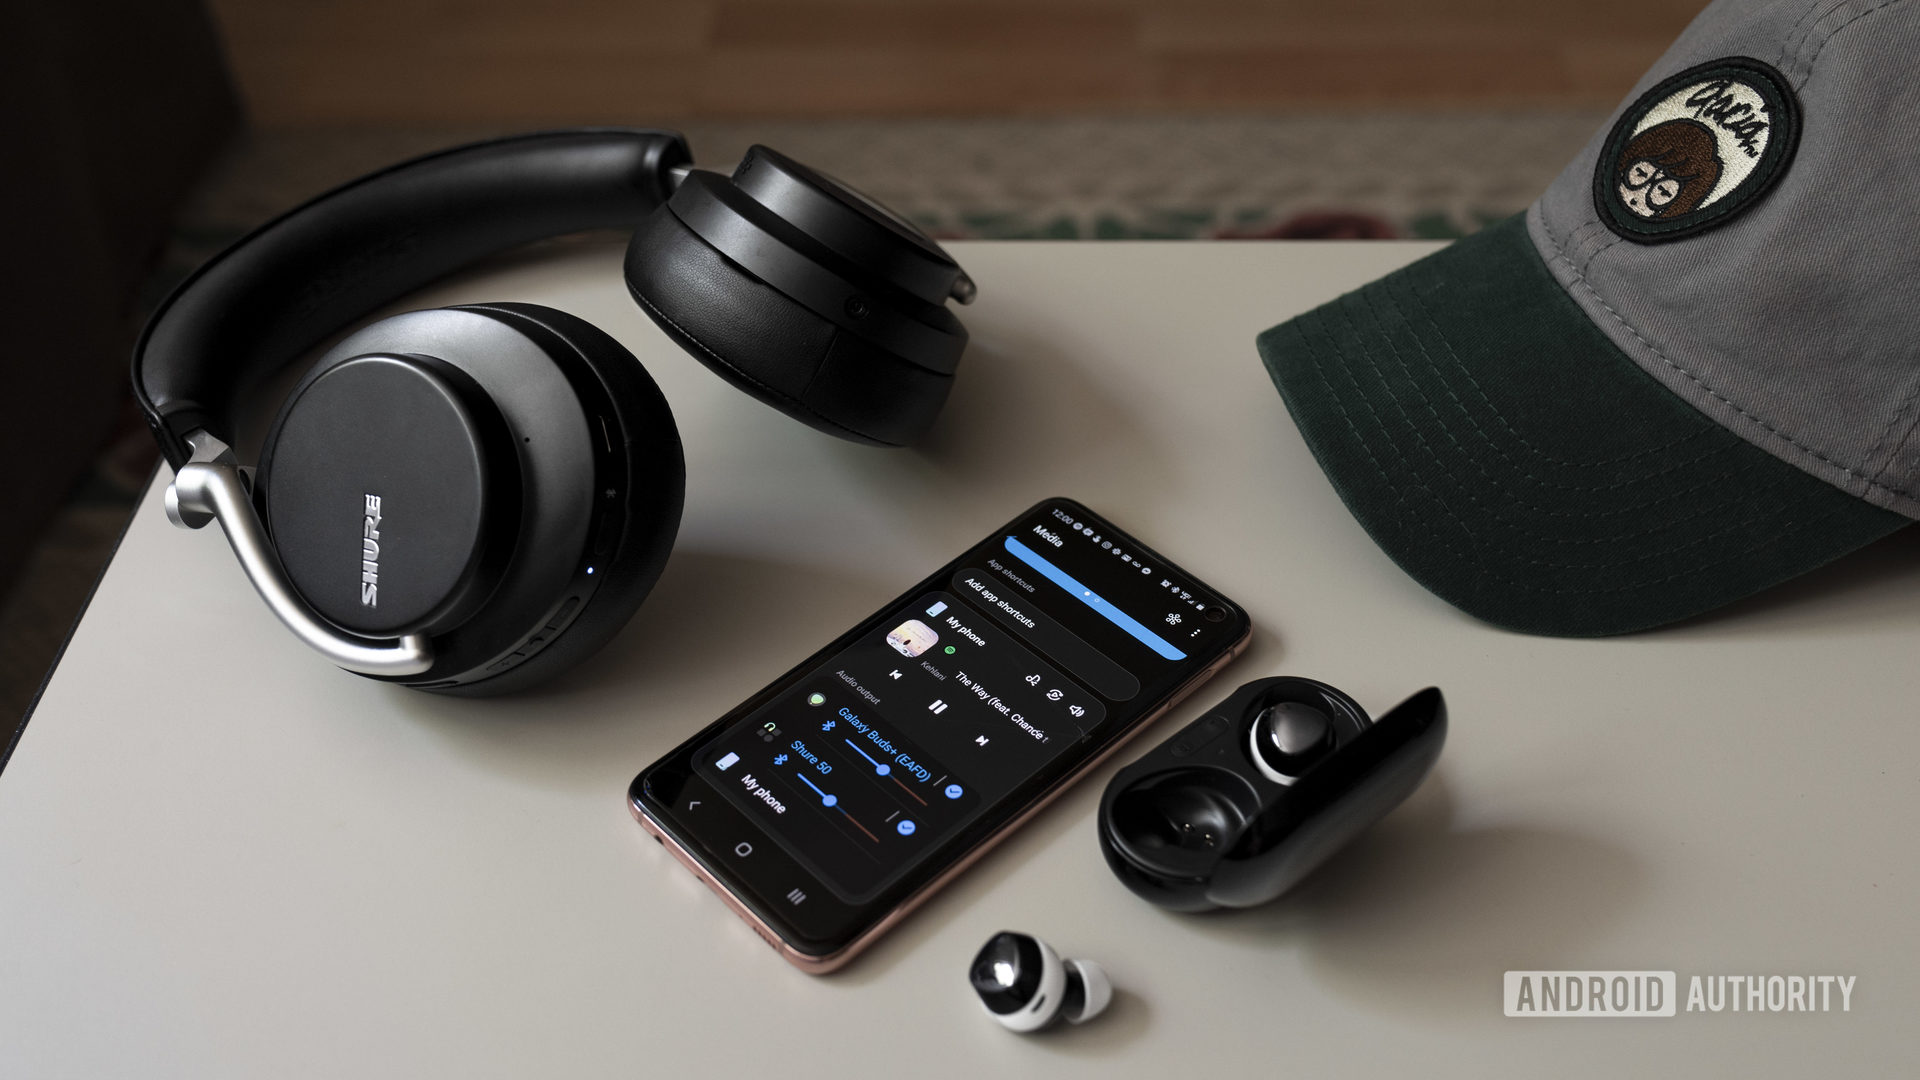 Samsung Dual Audio outputting from a Samsung Galaxy S10e smartphone to the Galaxy Buds Plus and Shure AOJNIC 50.